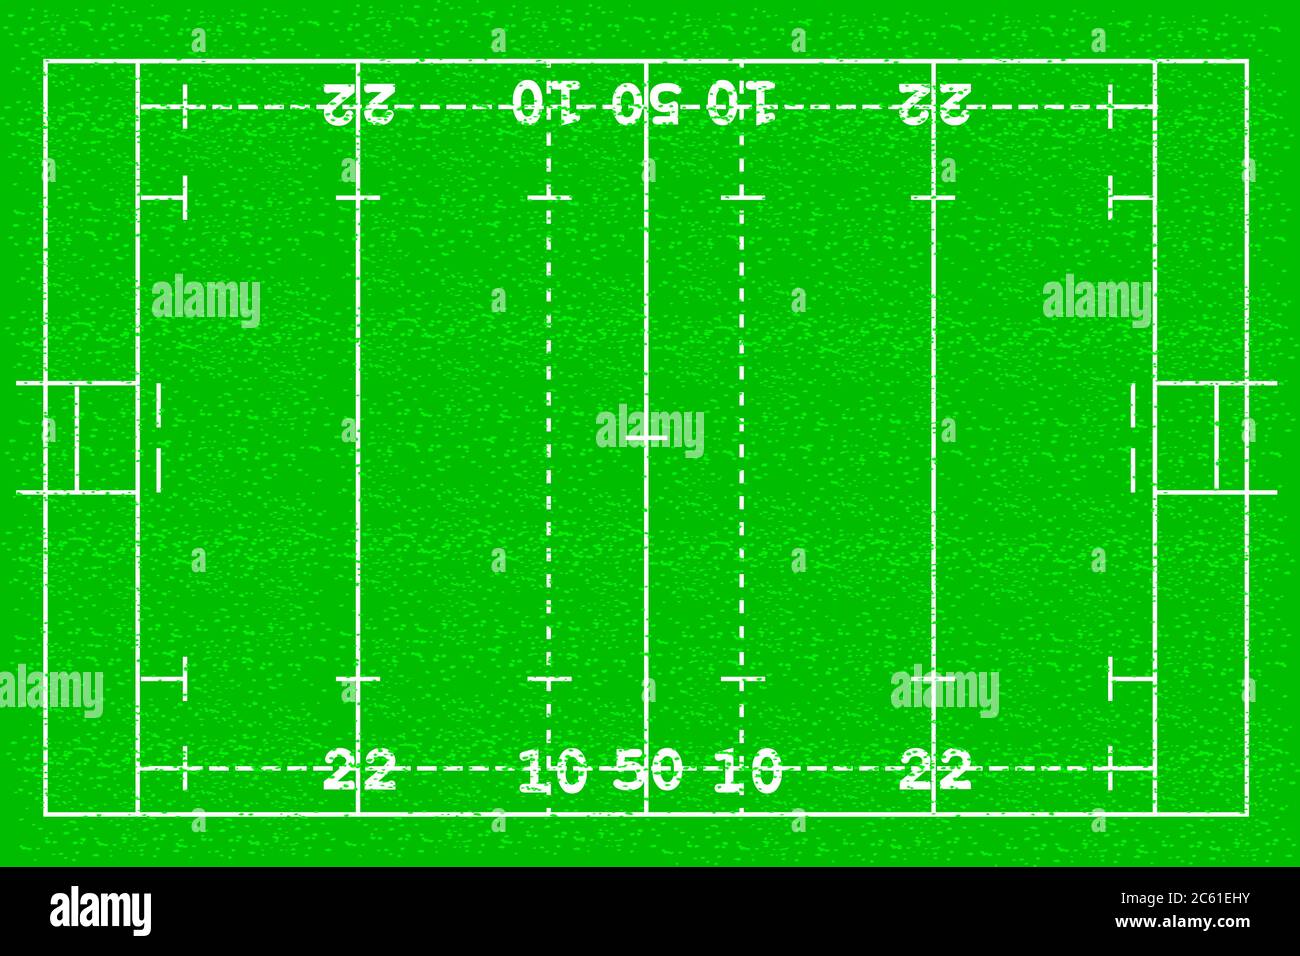 Rugby football field background Football grass field vector illustration layout Stock Vector